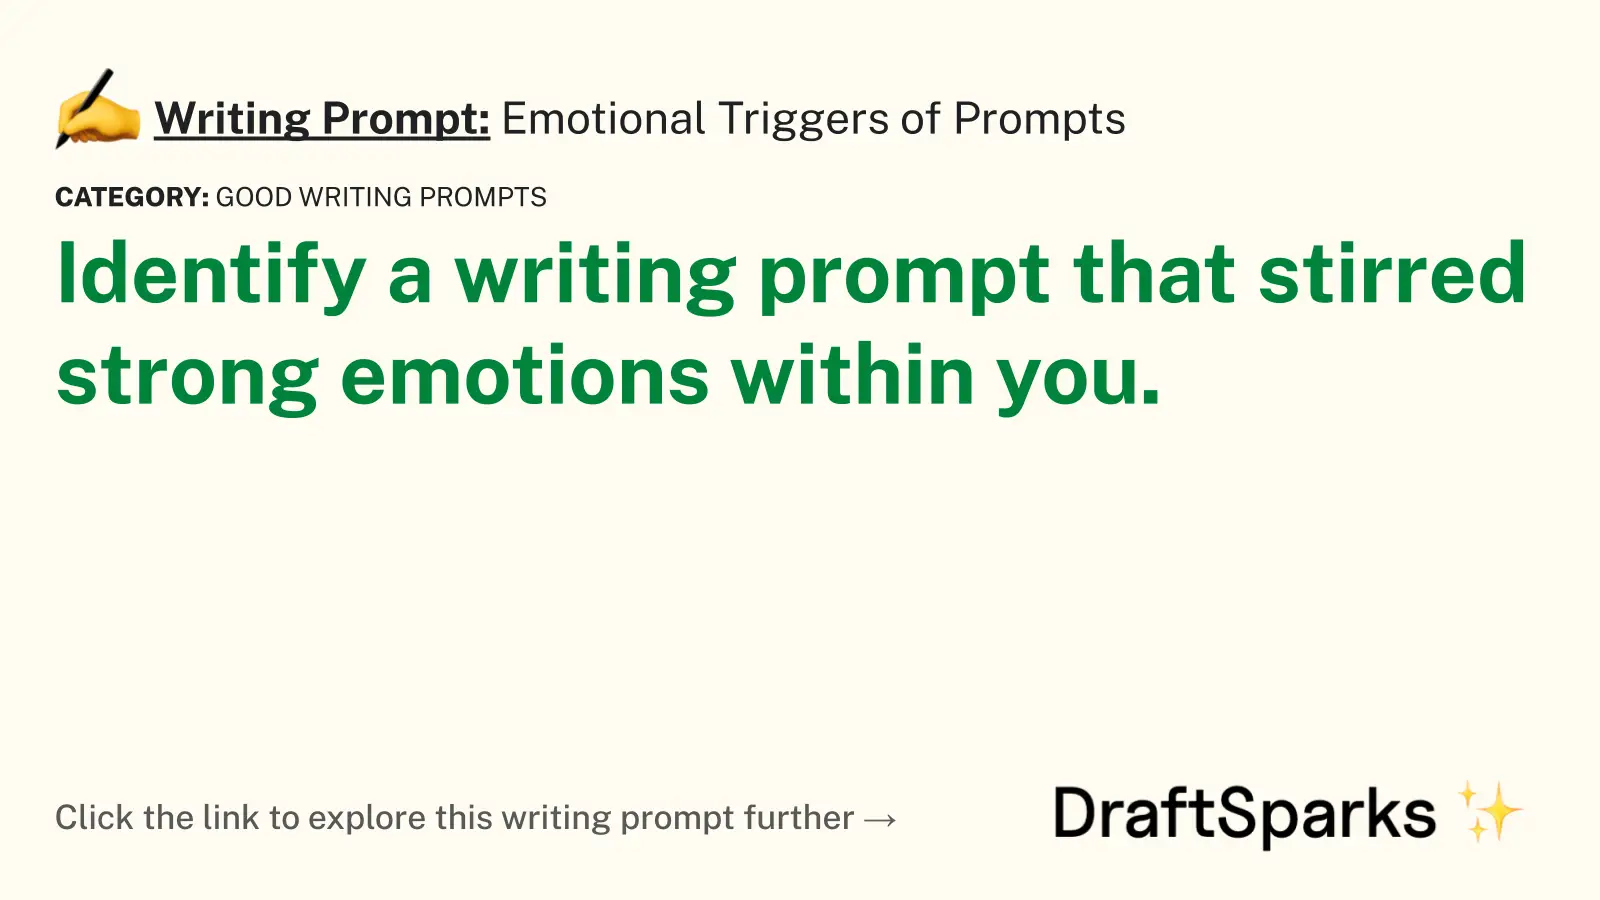 Emotional Triggers of Prompts